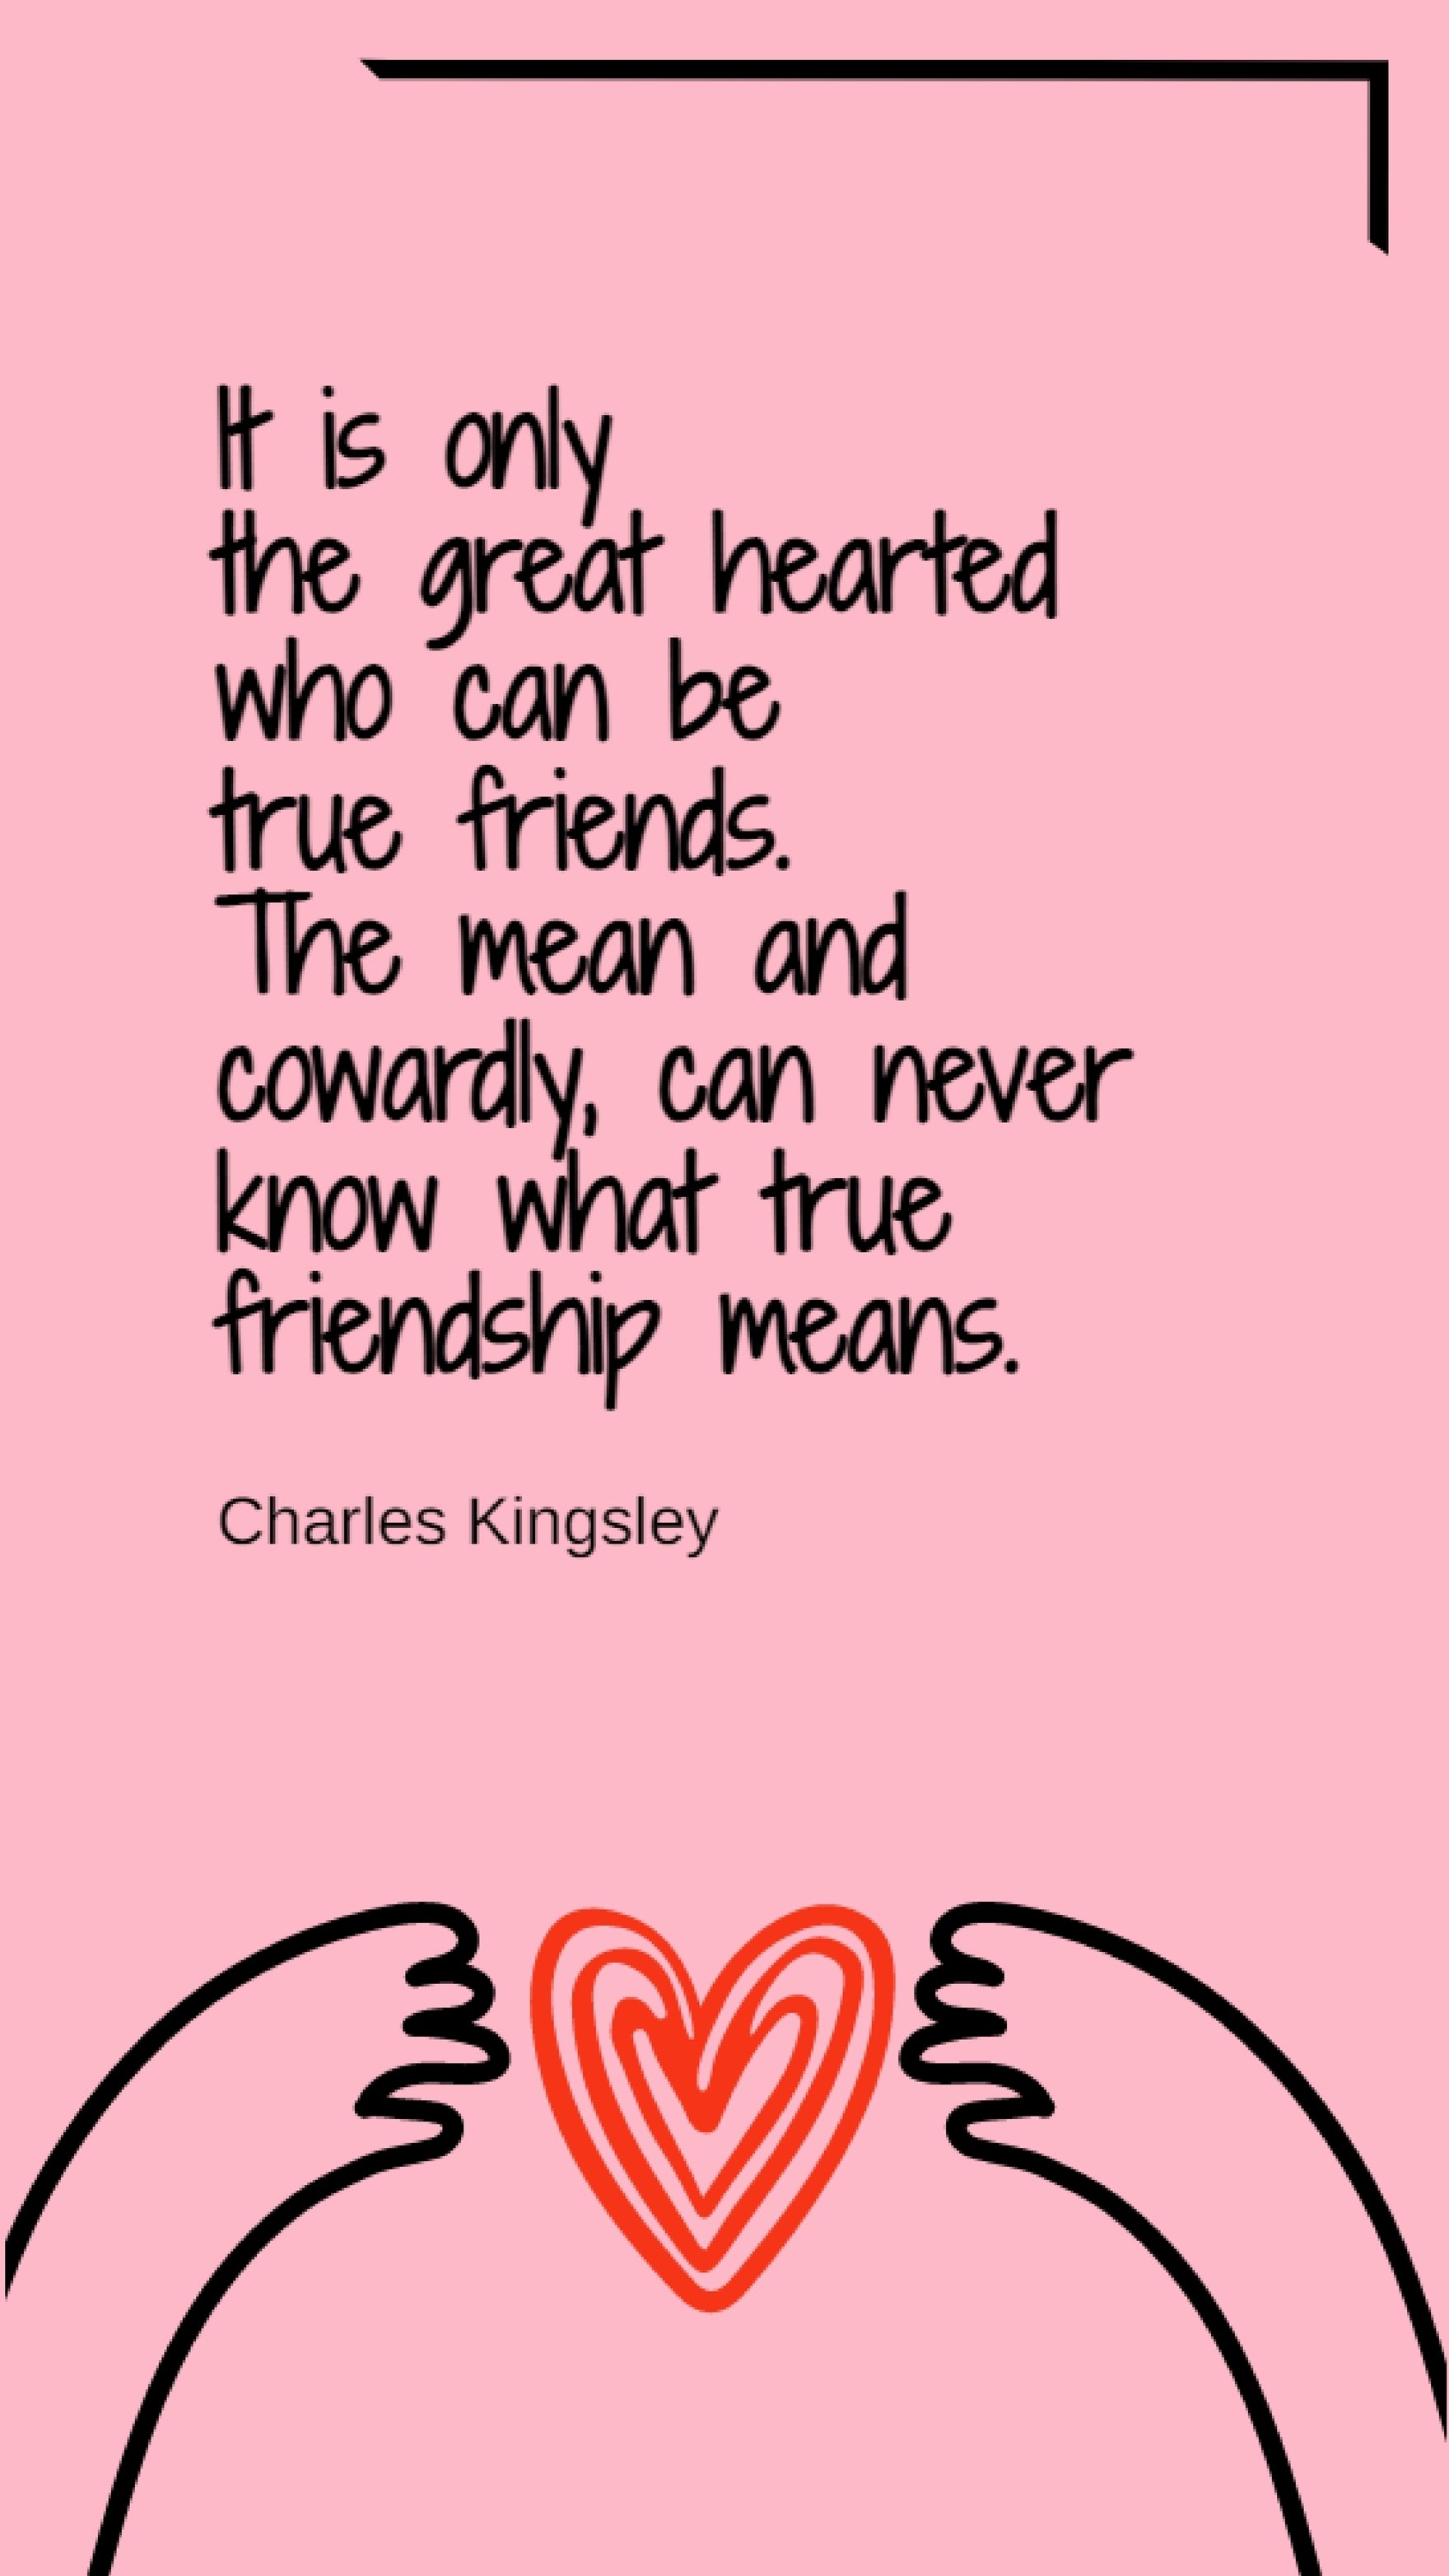 Charles Kingsley - It is only the great hearted who can be true friends. The mean and cowardly, can never know what true friendship means.